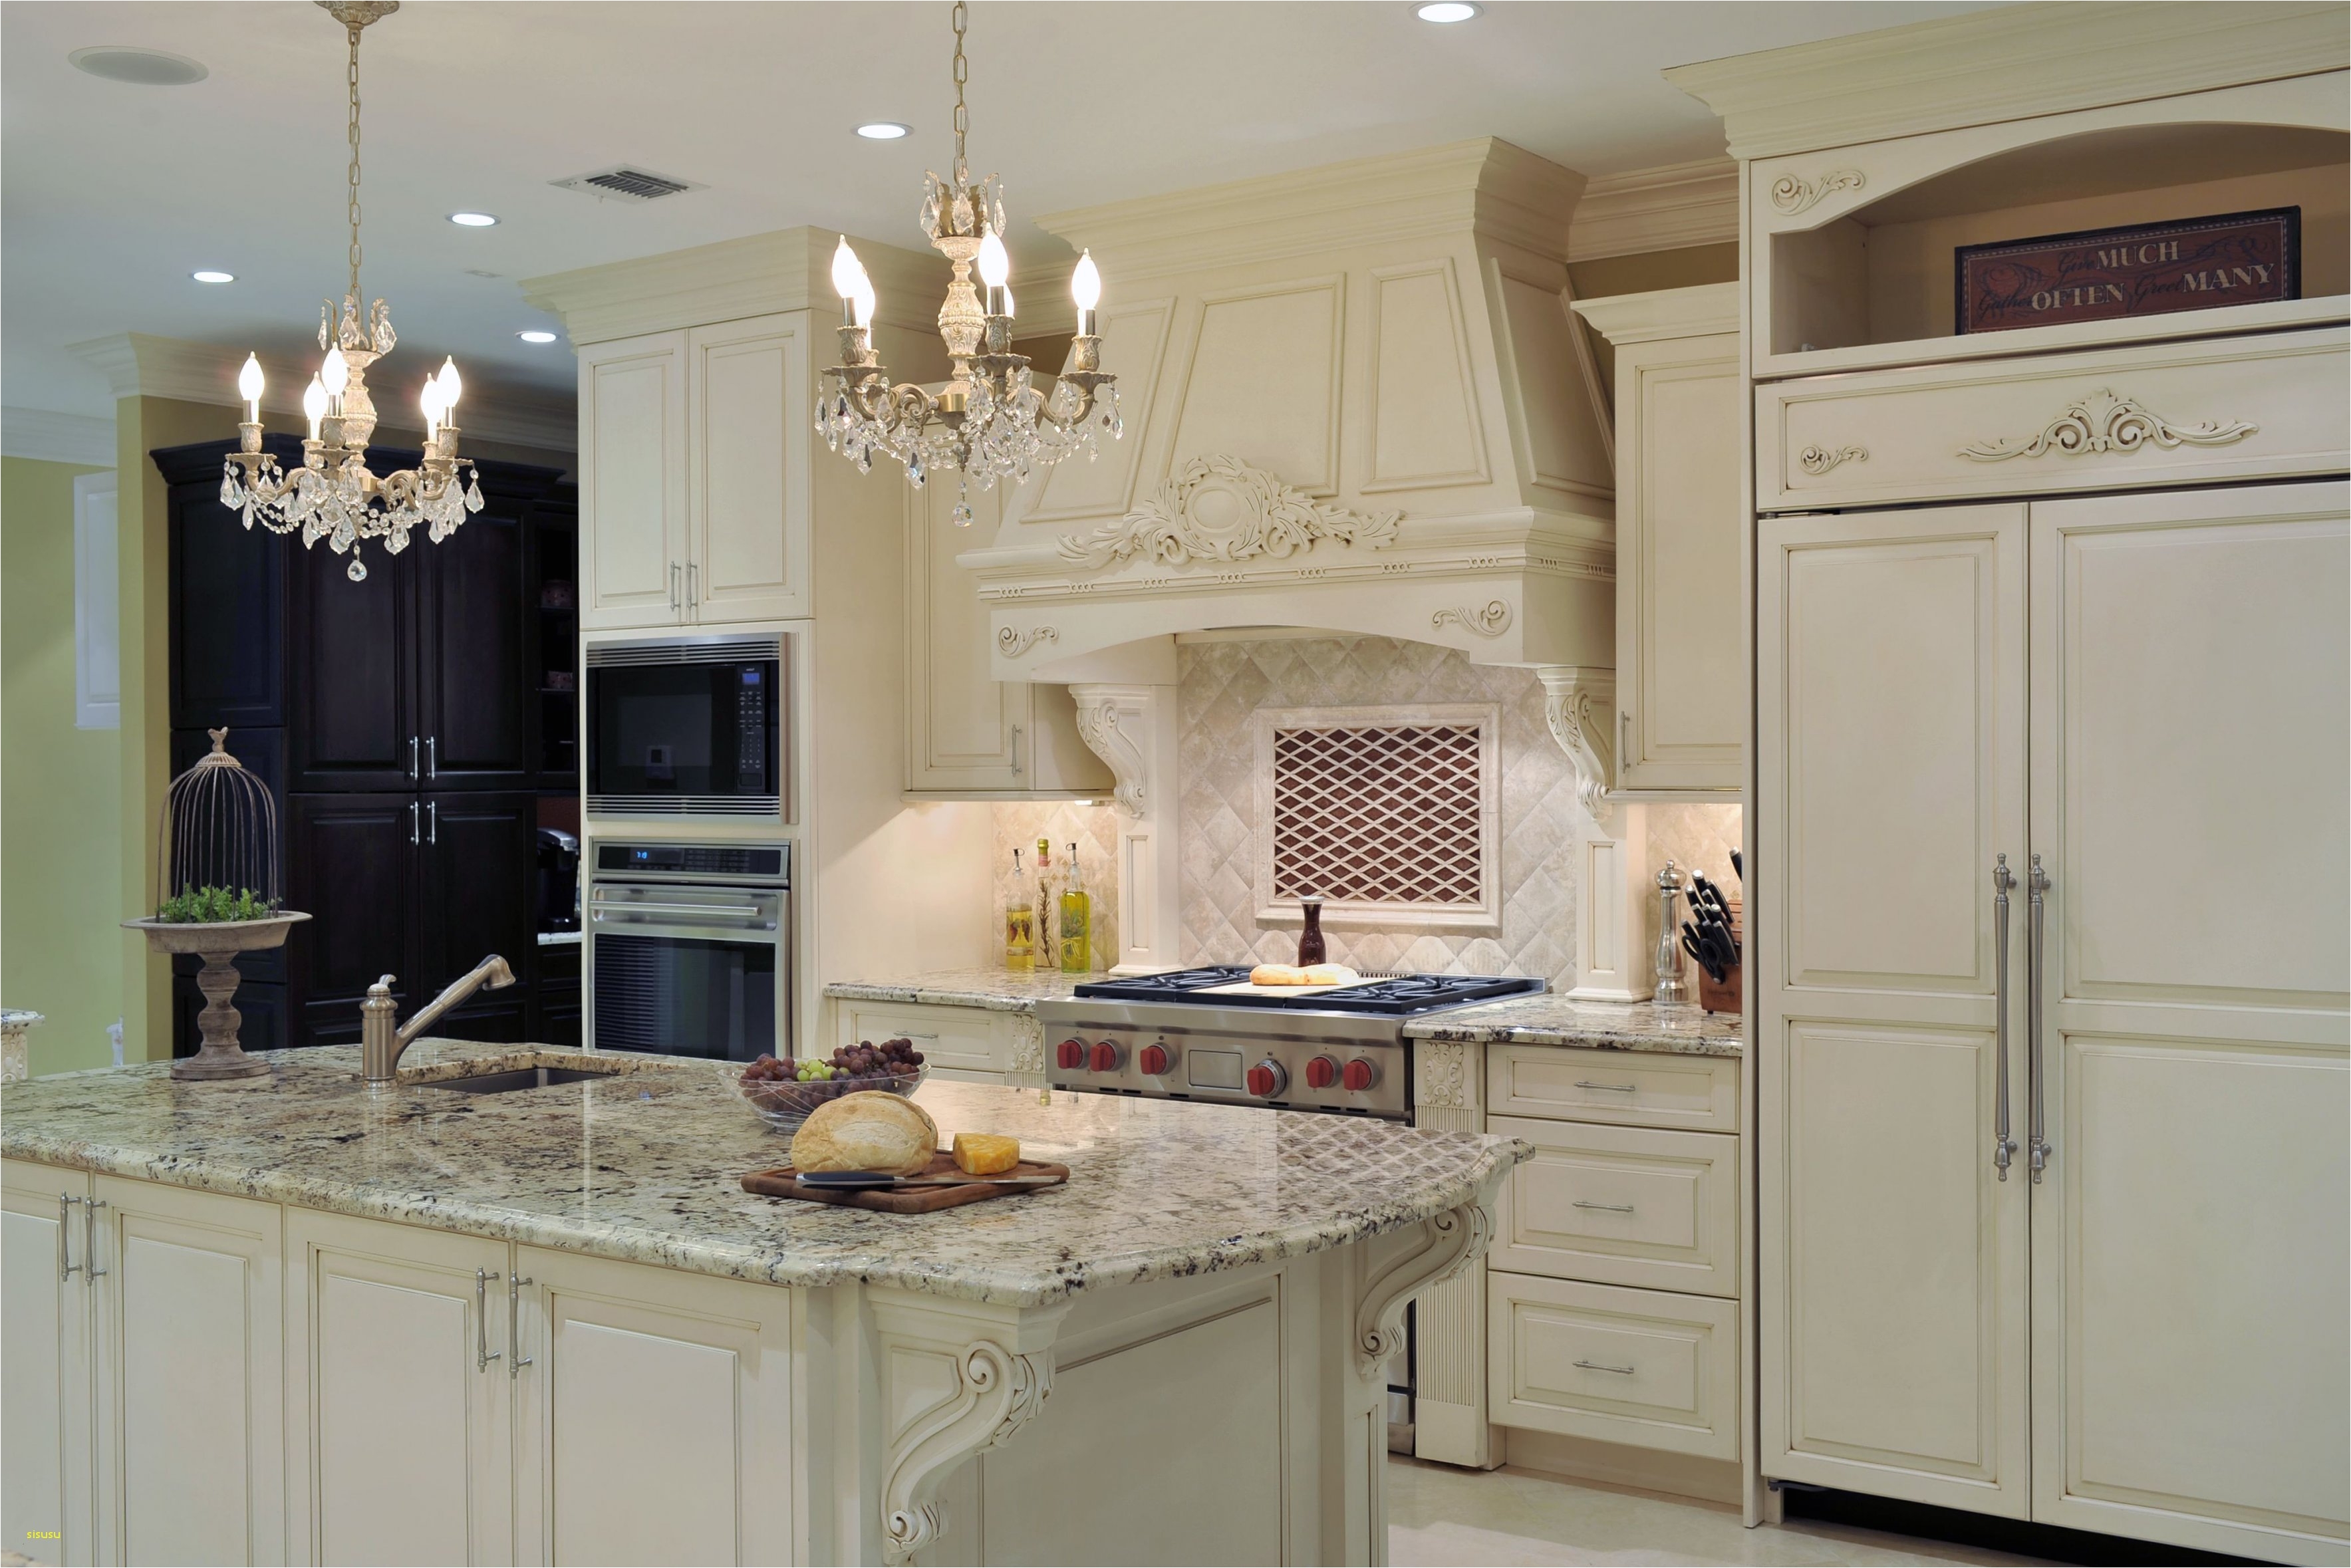 kitchen puck lights awesome kitchen cabinets and lighting luxury kitchen cabinet 0d felice kitchen of kitchen